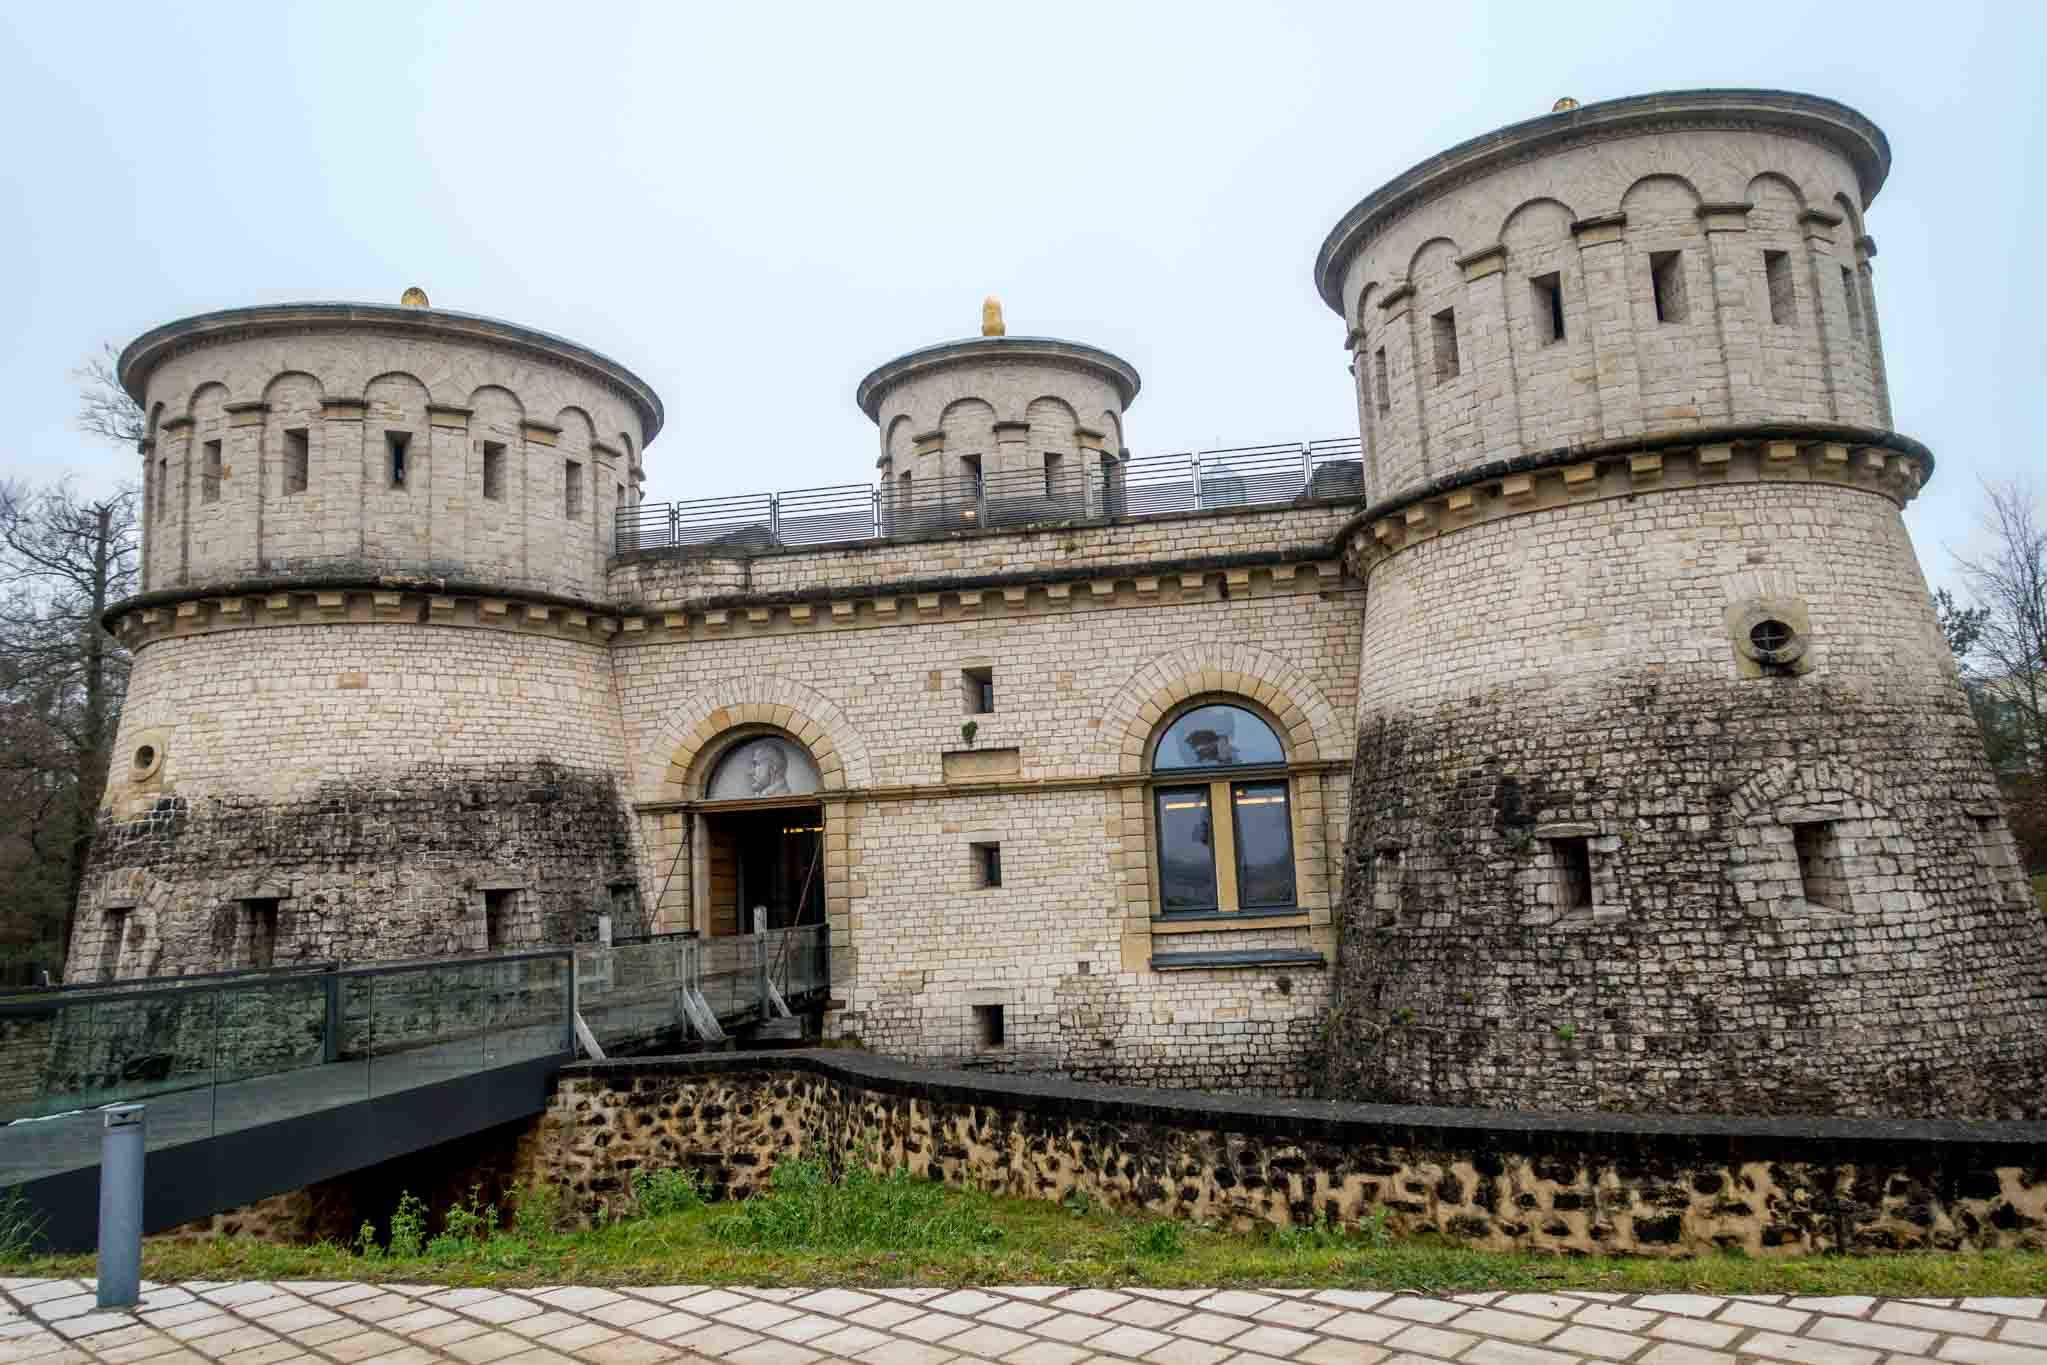 18th-century fort that is now a museum